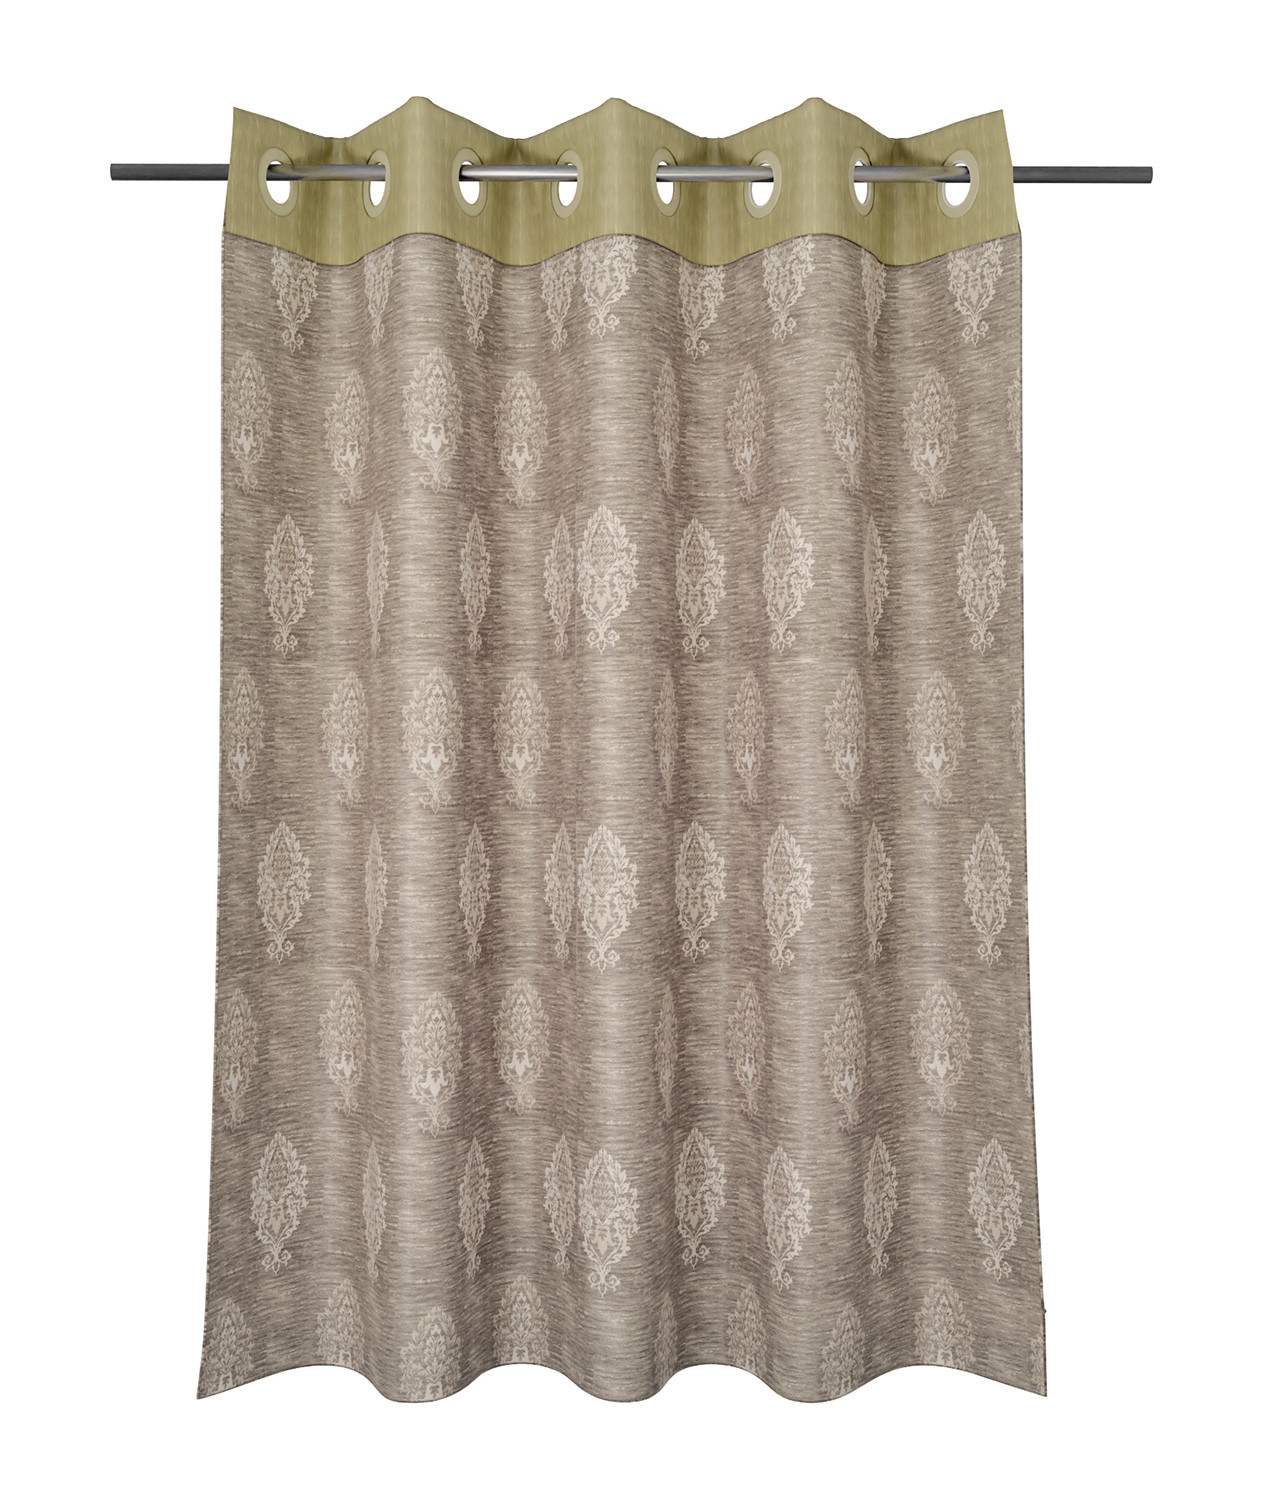 Kuber Industries Faux Silk Decorative 7 Feet Door Curtain | Damask Print Blackout Drapes Curtain With 8 Eyelet For Home & Office (Cream)